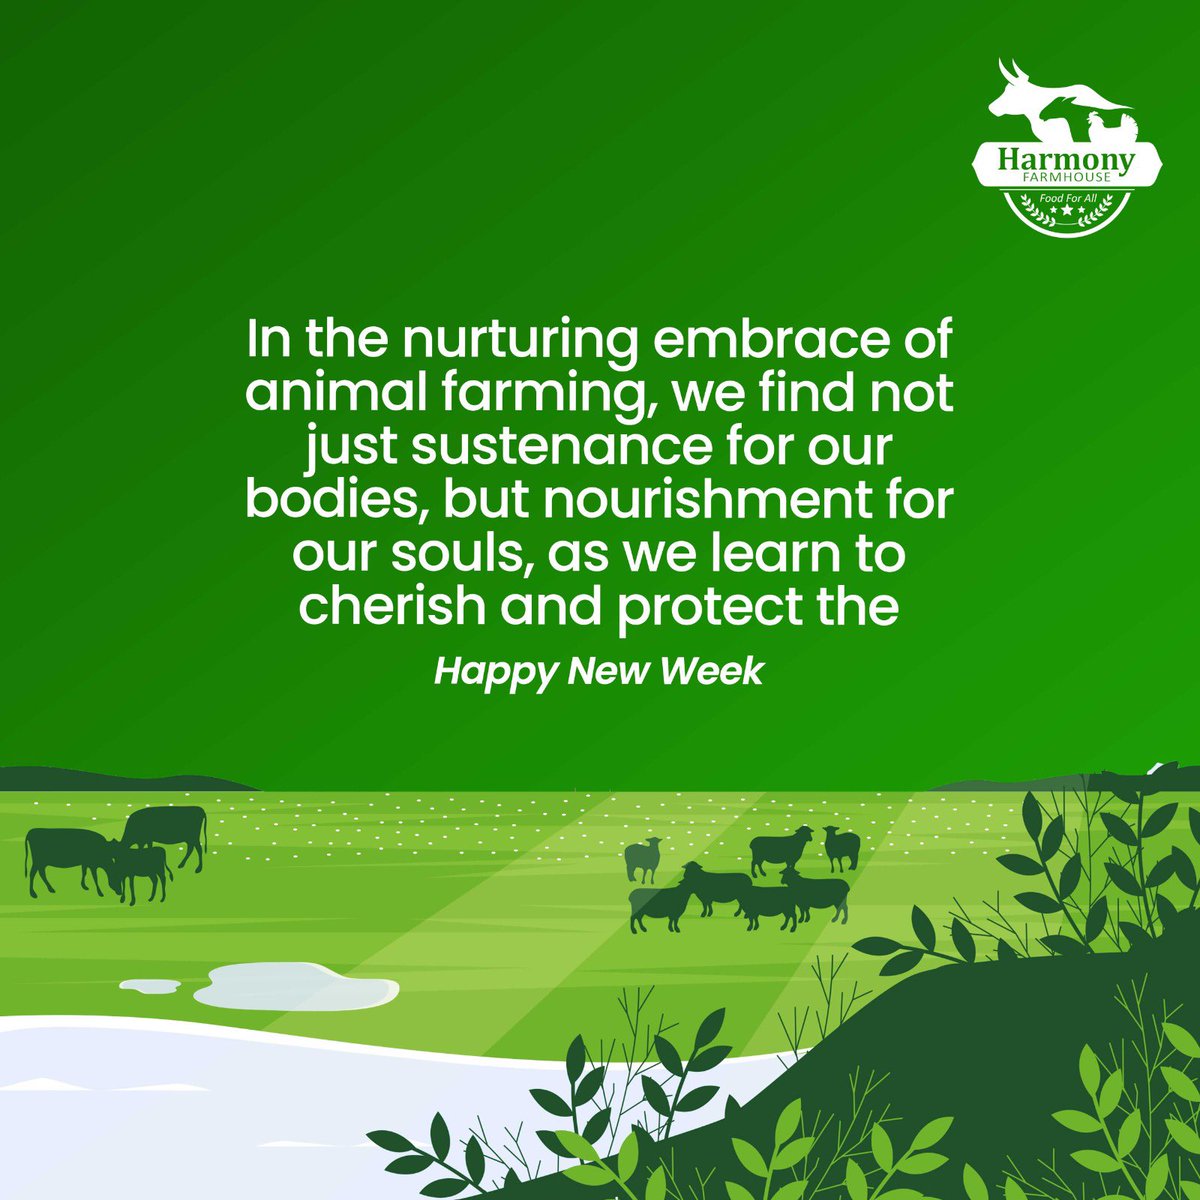 Feel the farm vibes this Monday! We’re not just raising animals; we’re shaping futures. Let’s make it count! #harmonygroupng #farminglife #farminglife🌾👨‍🌾 #harmonyfarms #mondaymotivation